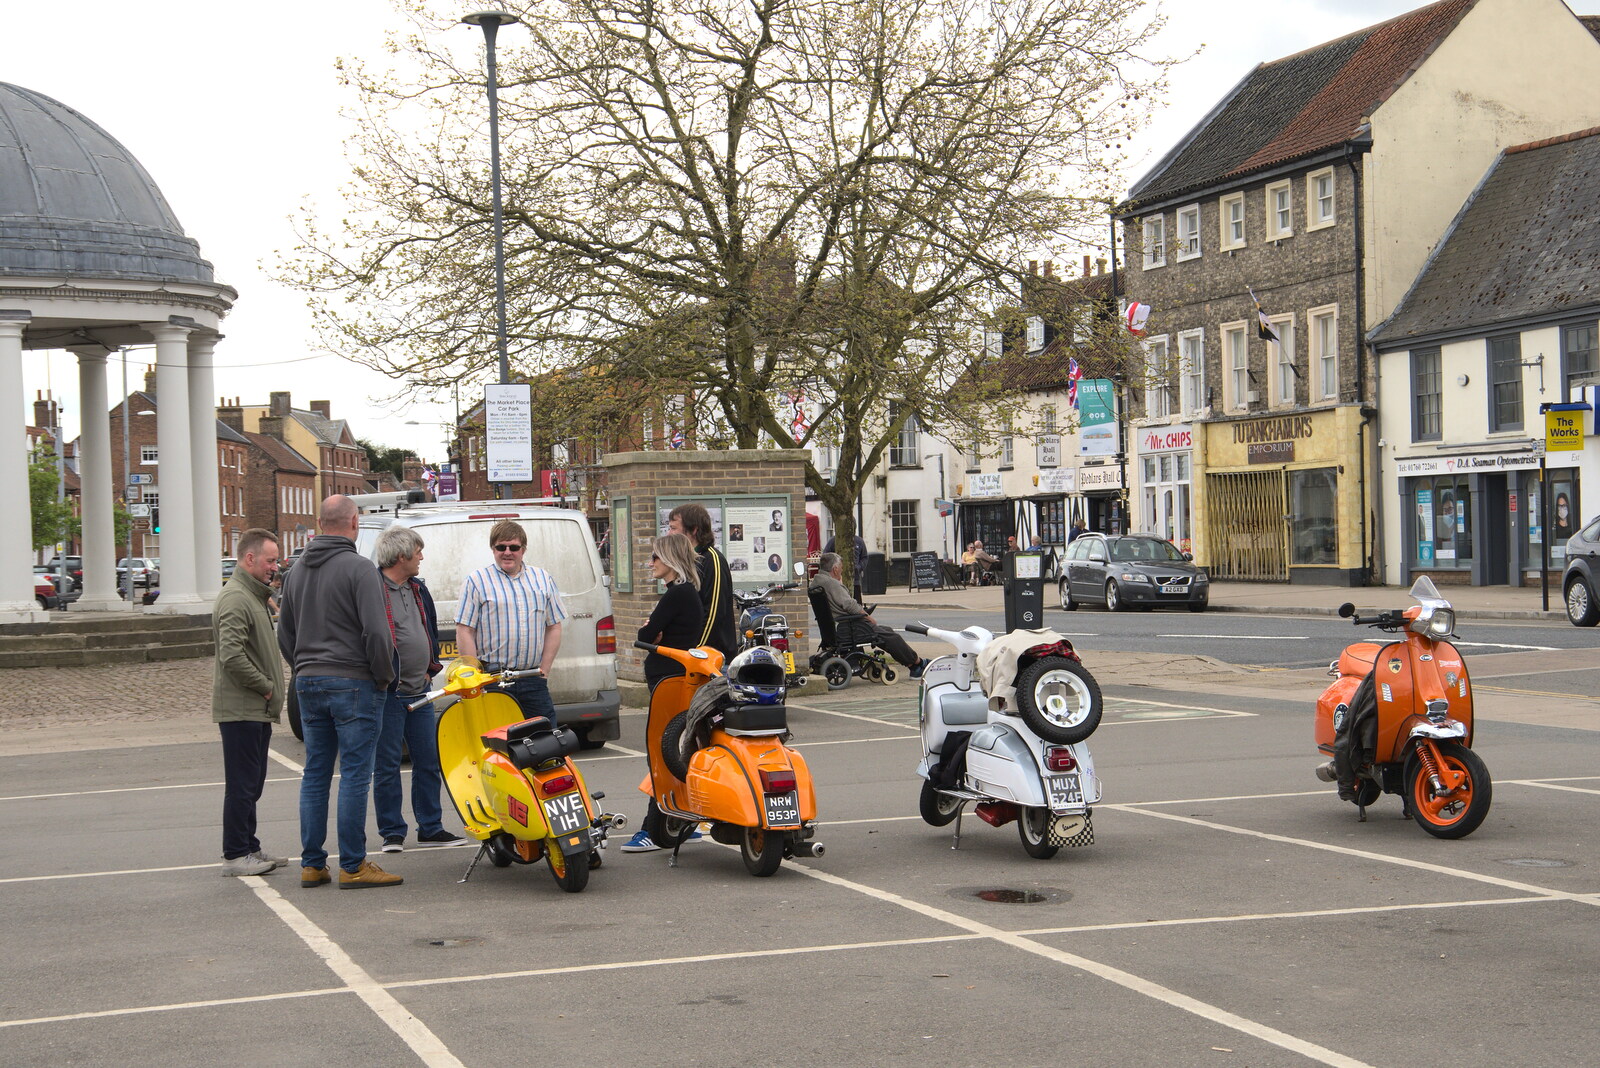 A line-up of classic Vespas and Lambrettas from A Vaccination Afternoon, Swaffham, Norfolk - 9th May 2021